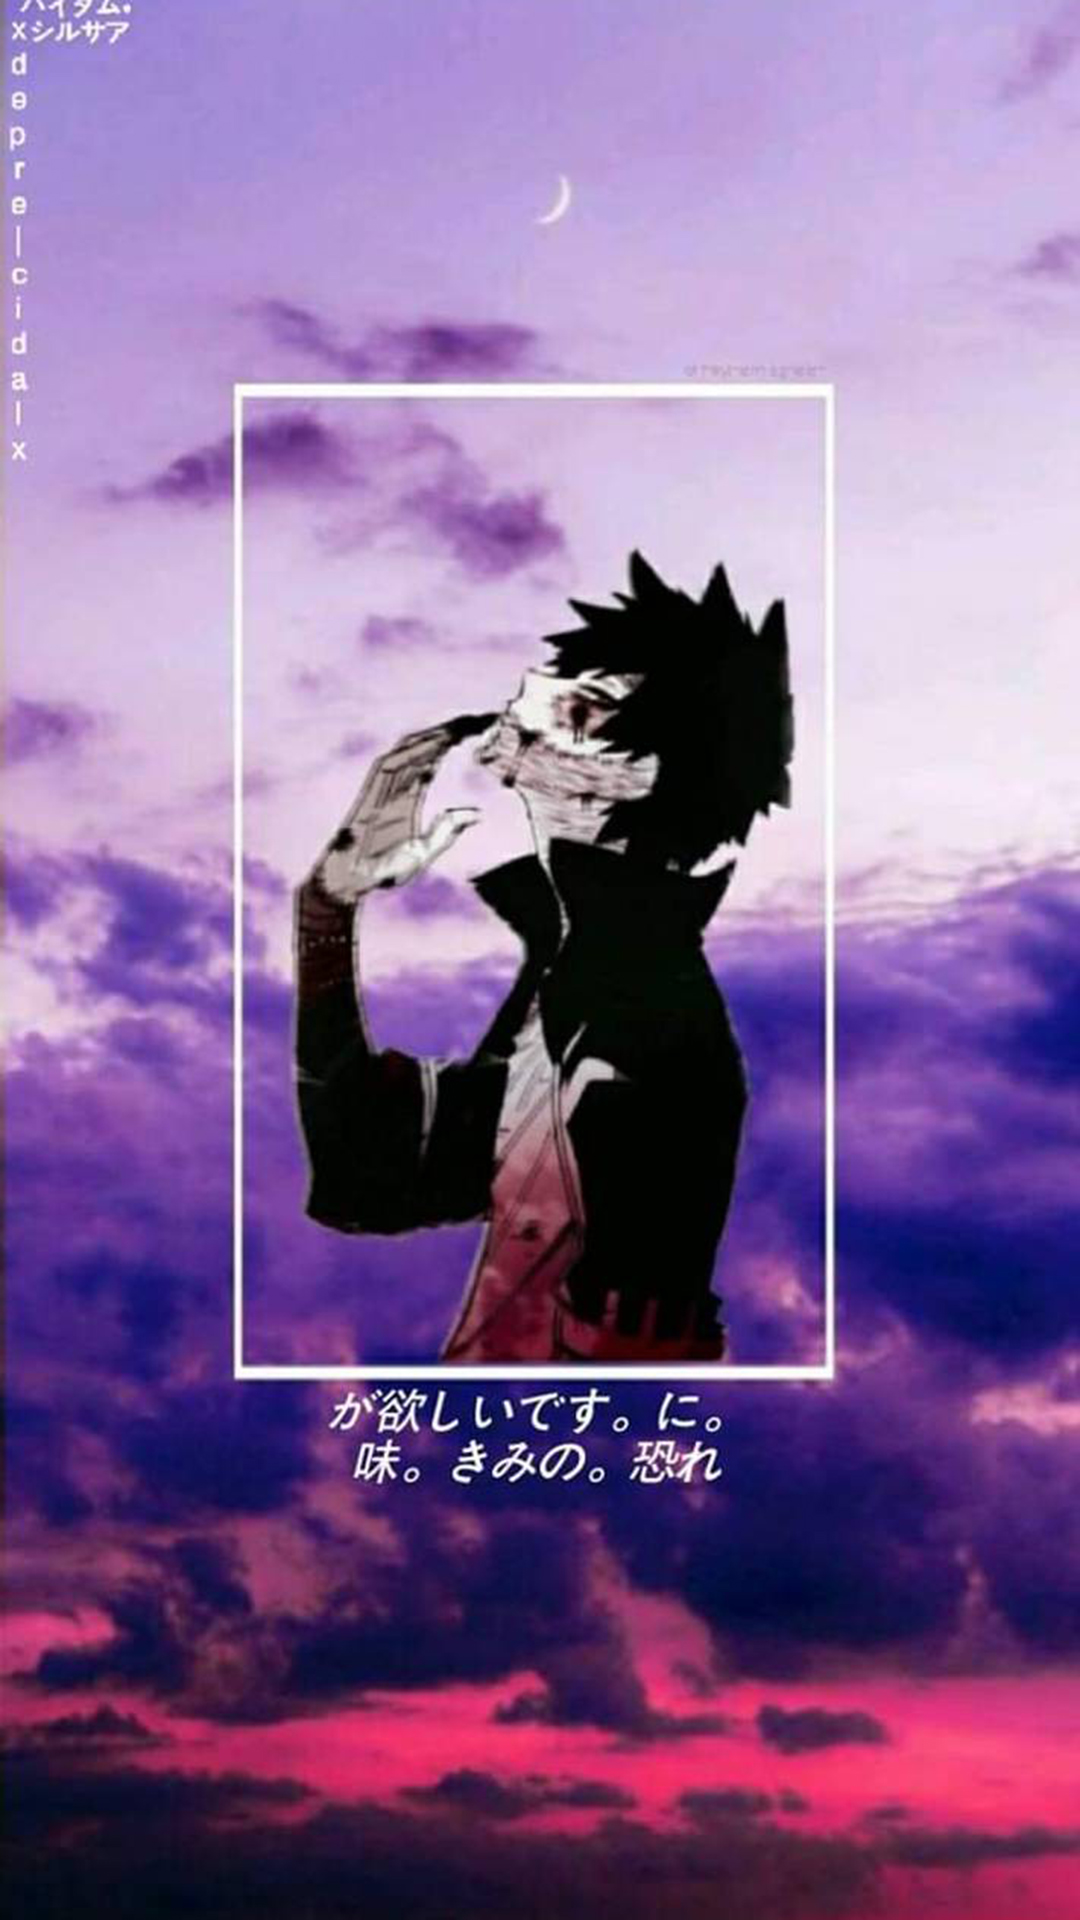 Dabi IPhone wallpaper  made it for myself thought maybe some of you guys  may like it too  rBokuNoHeroAcademia